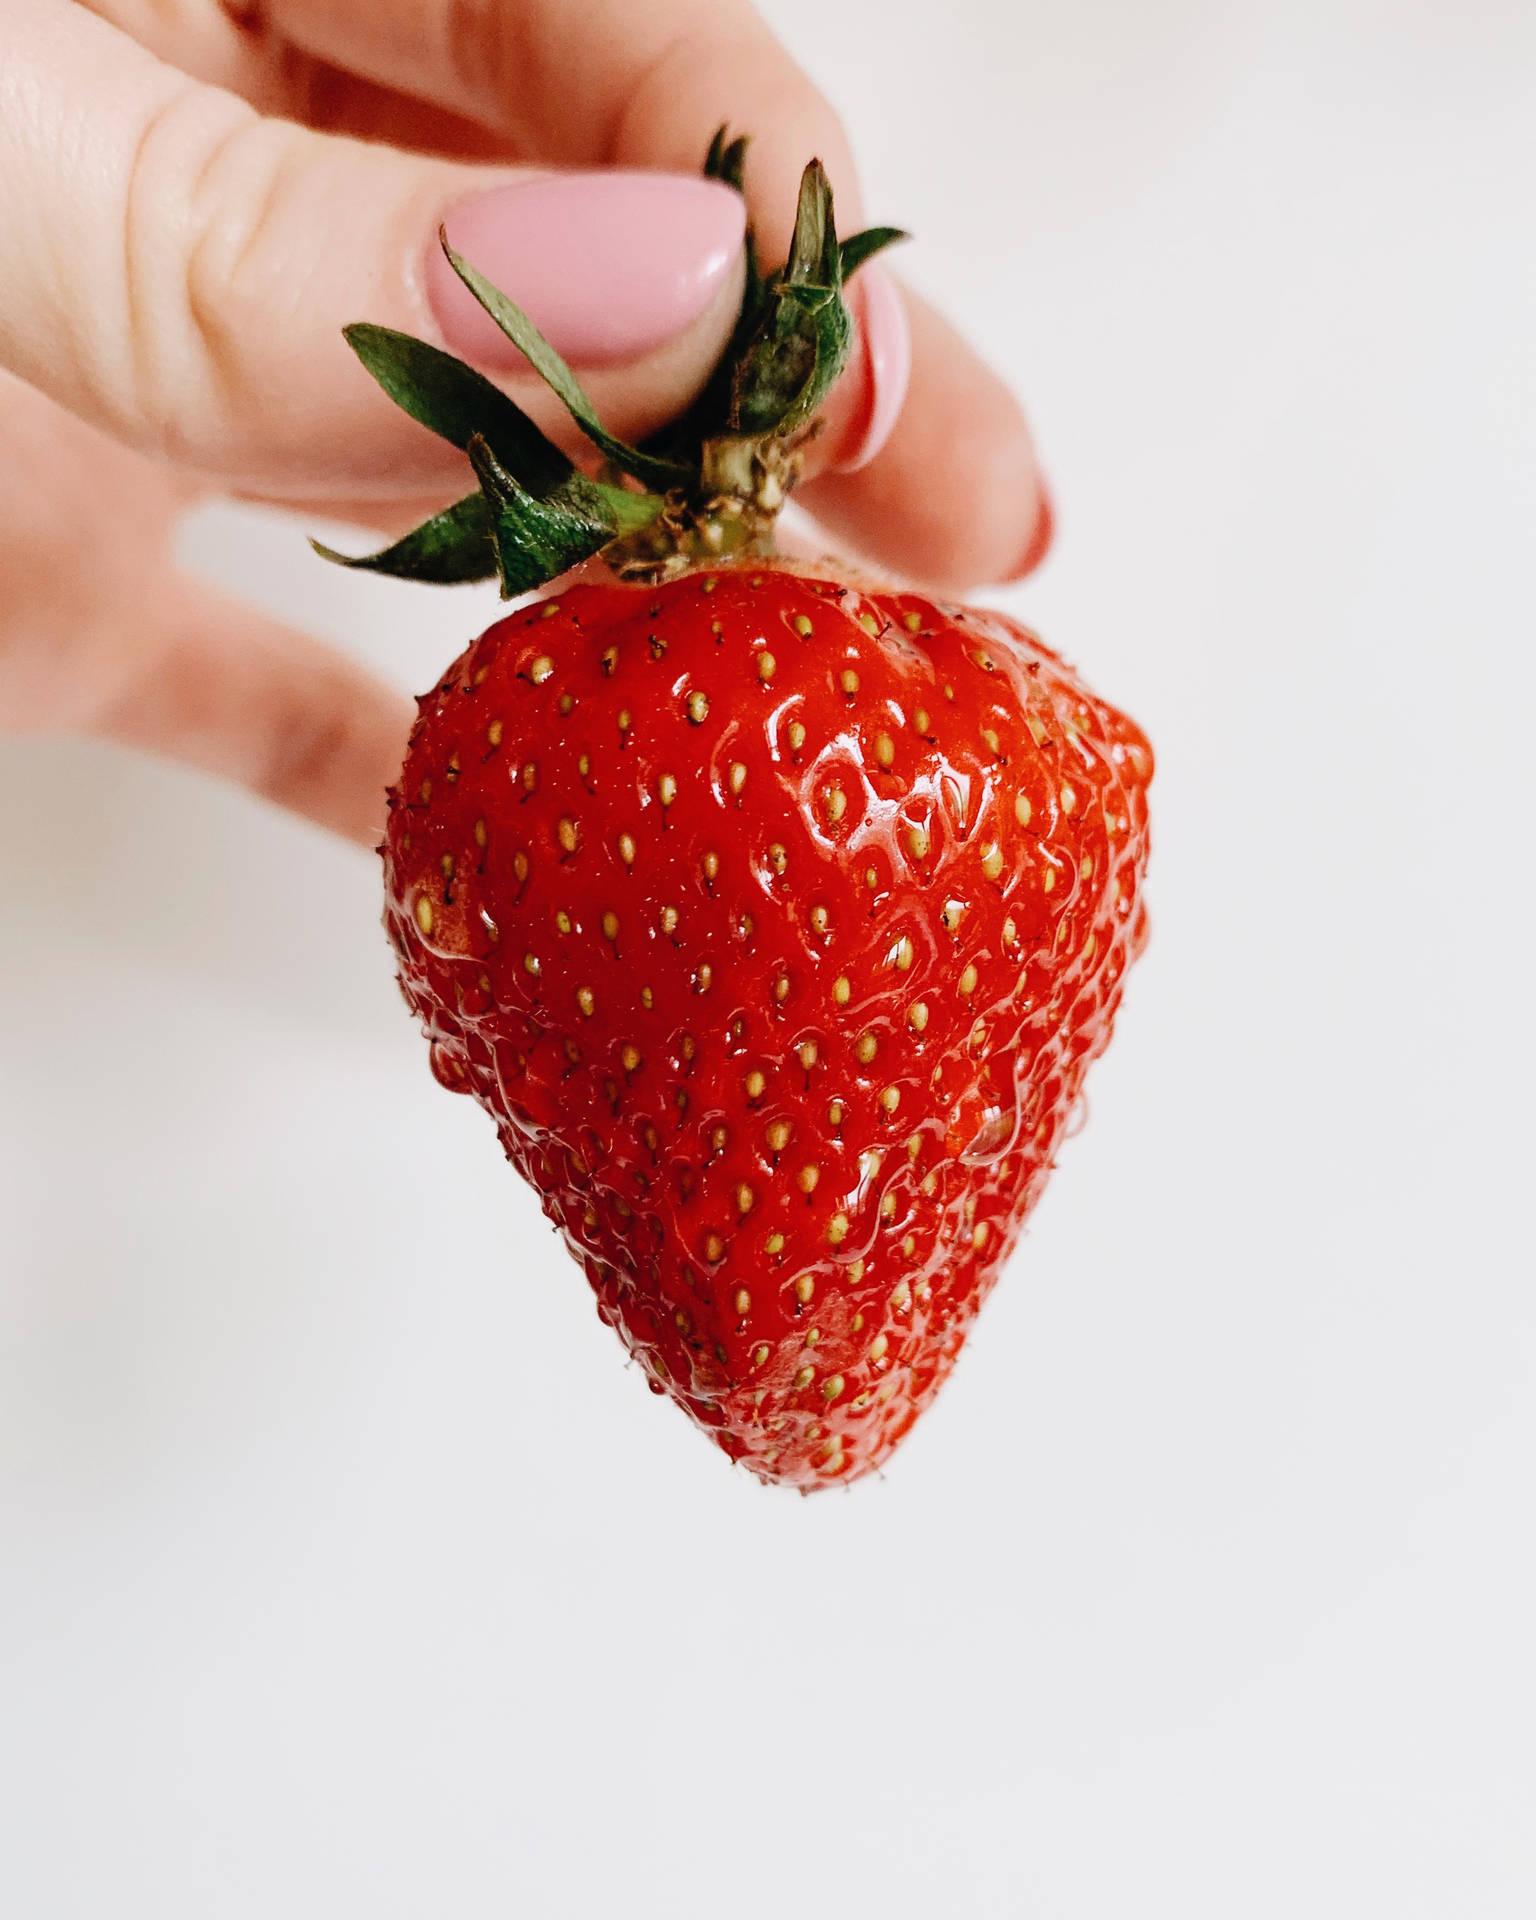 Strawberry Fruit Held By Hand